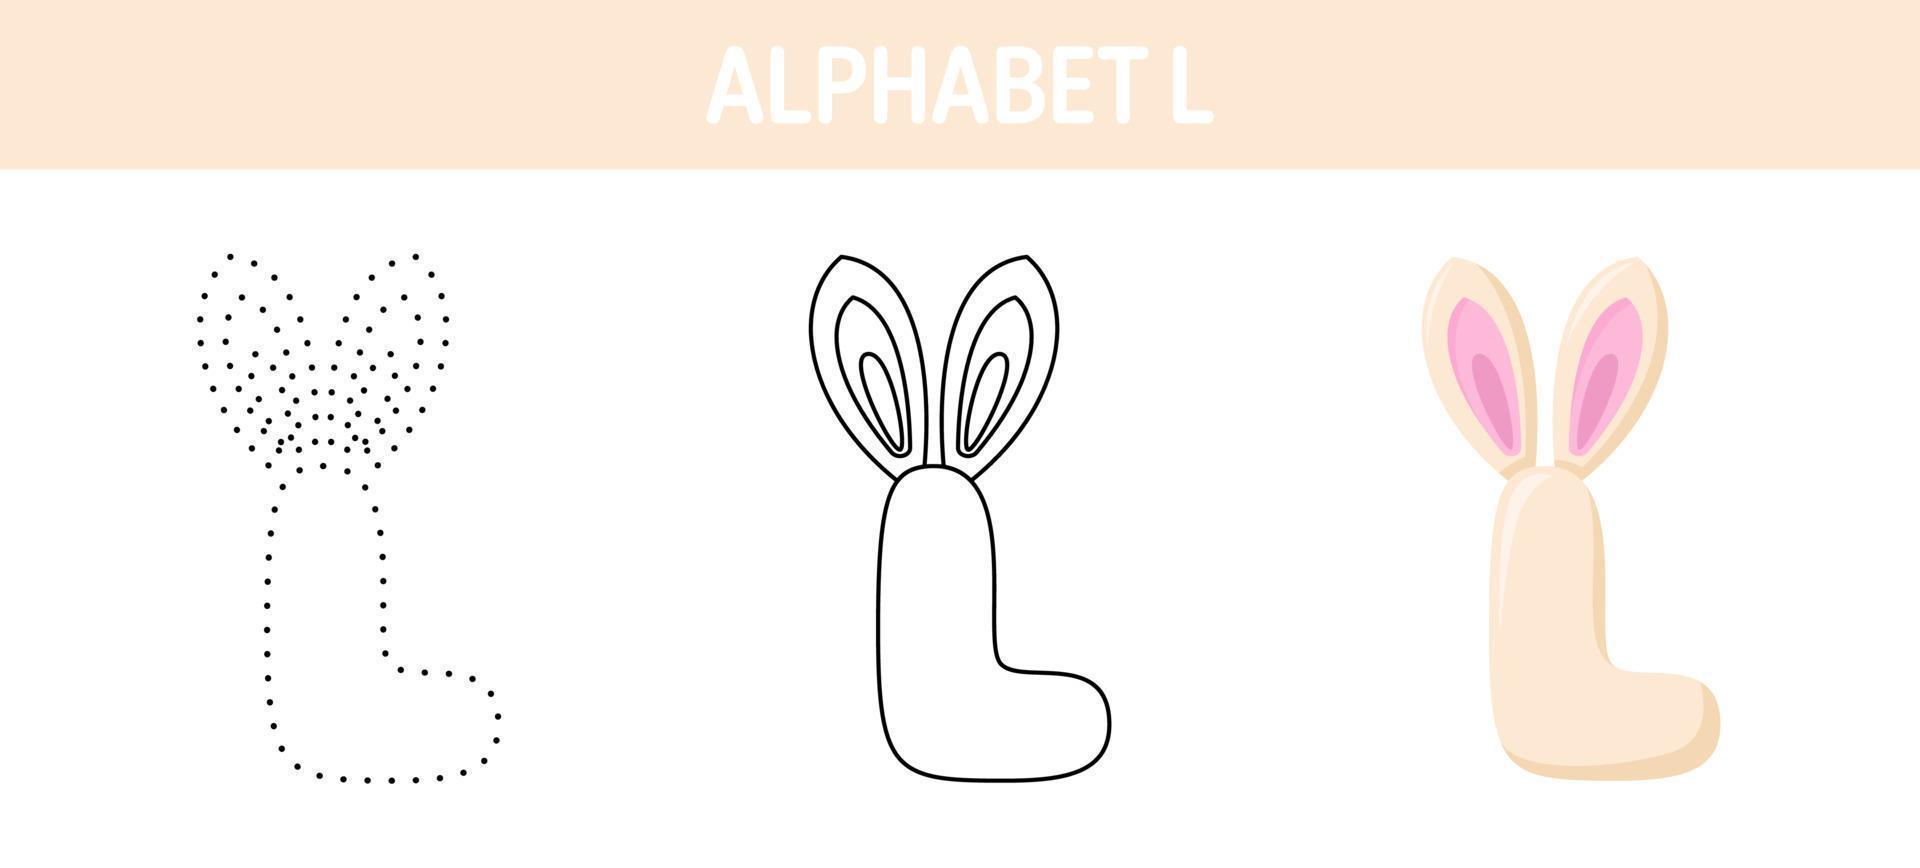 Alphabet L tracing and coloring worksheet for kids vector